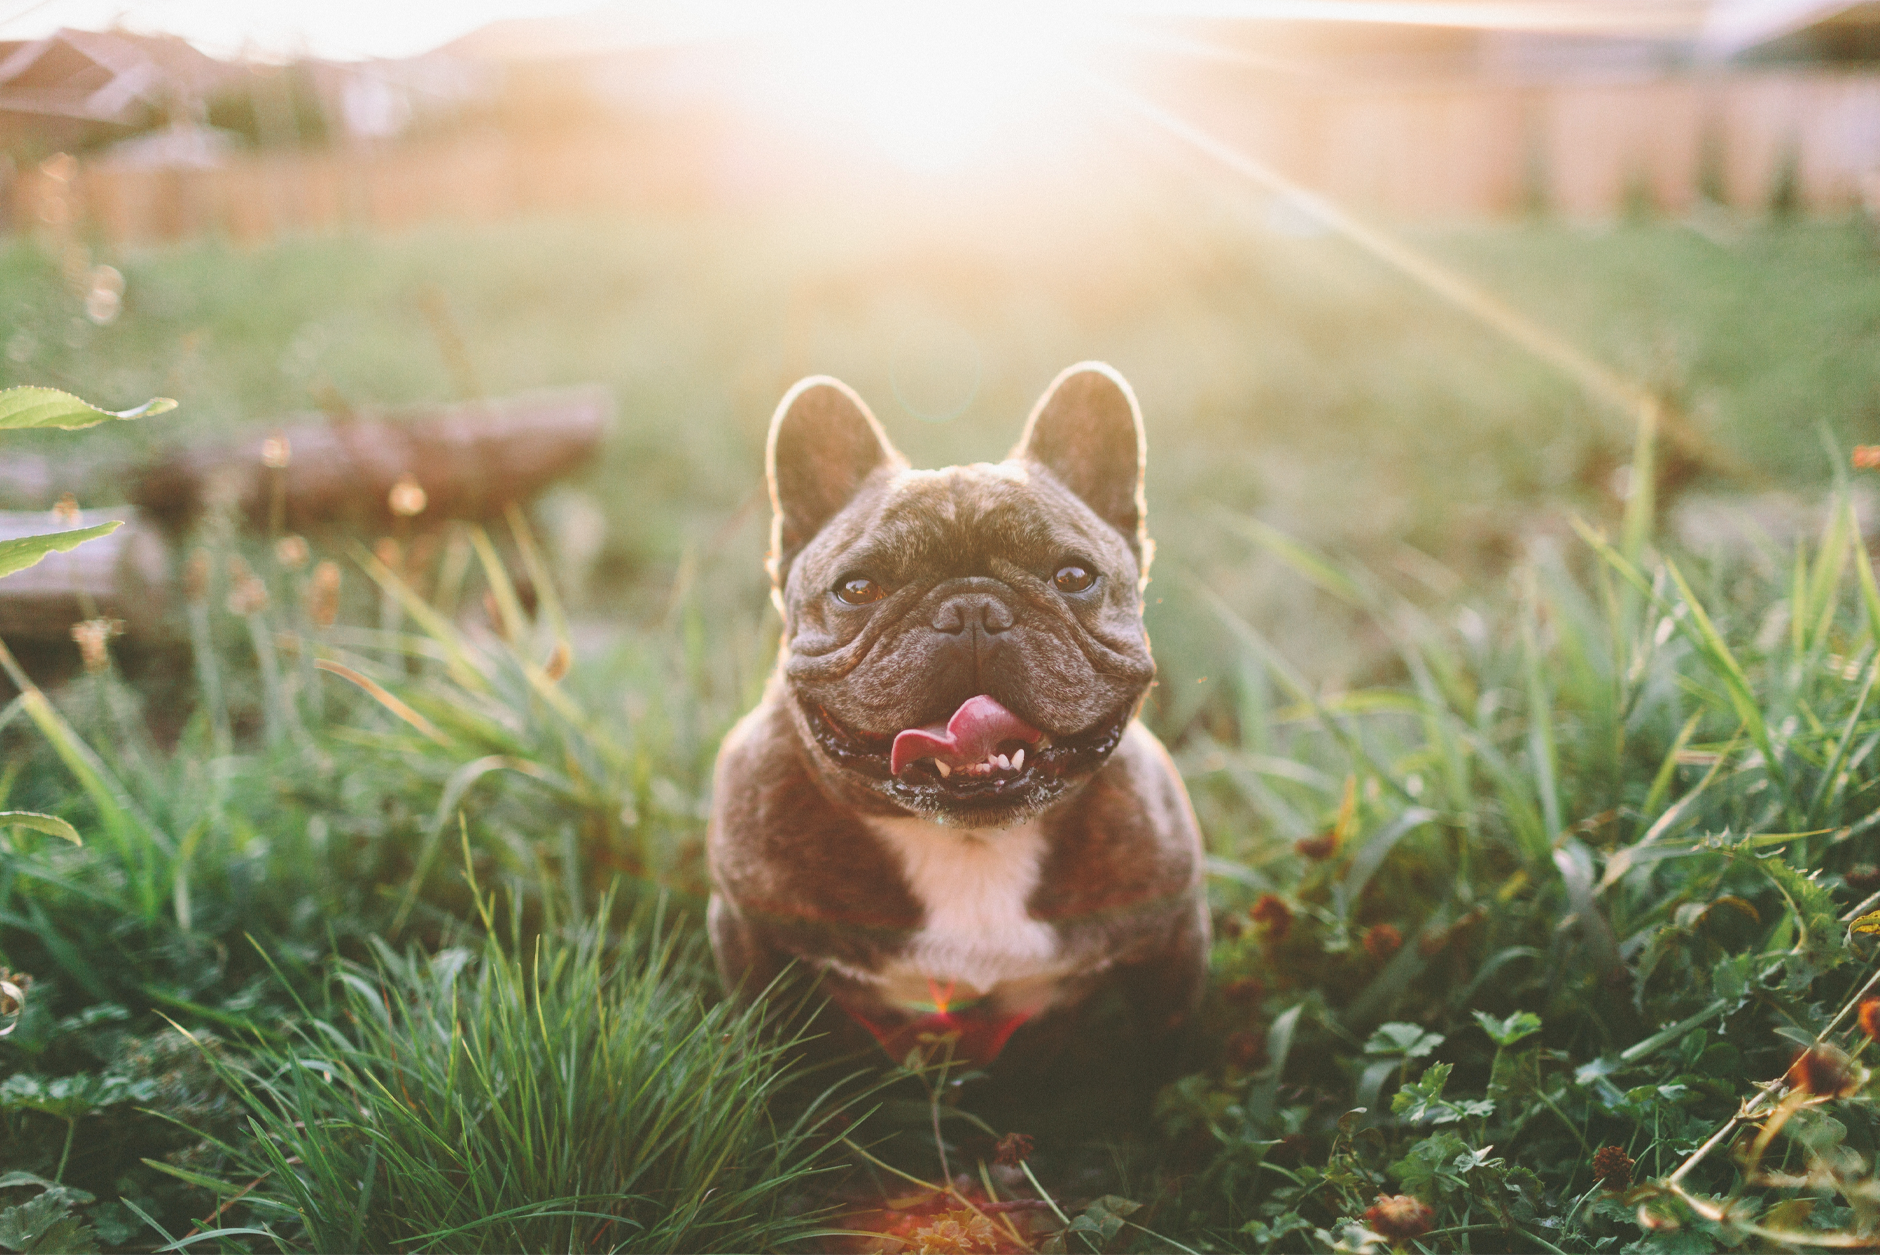 Dog Parks In Toronto - 5 Fantastic Spots To Check Out Today